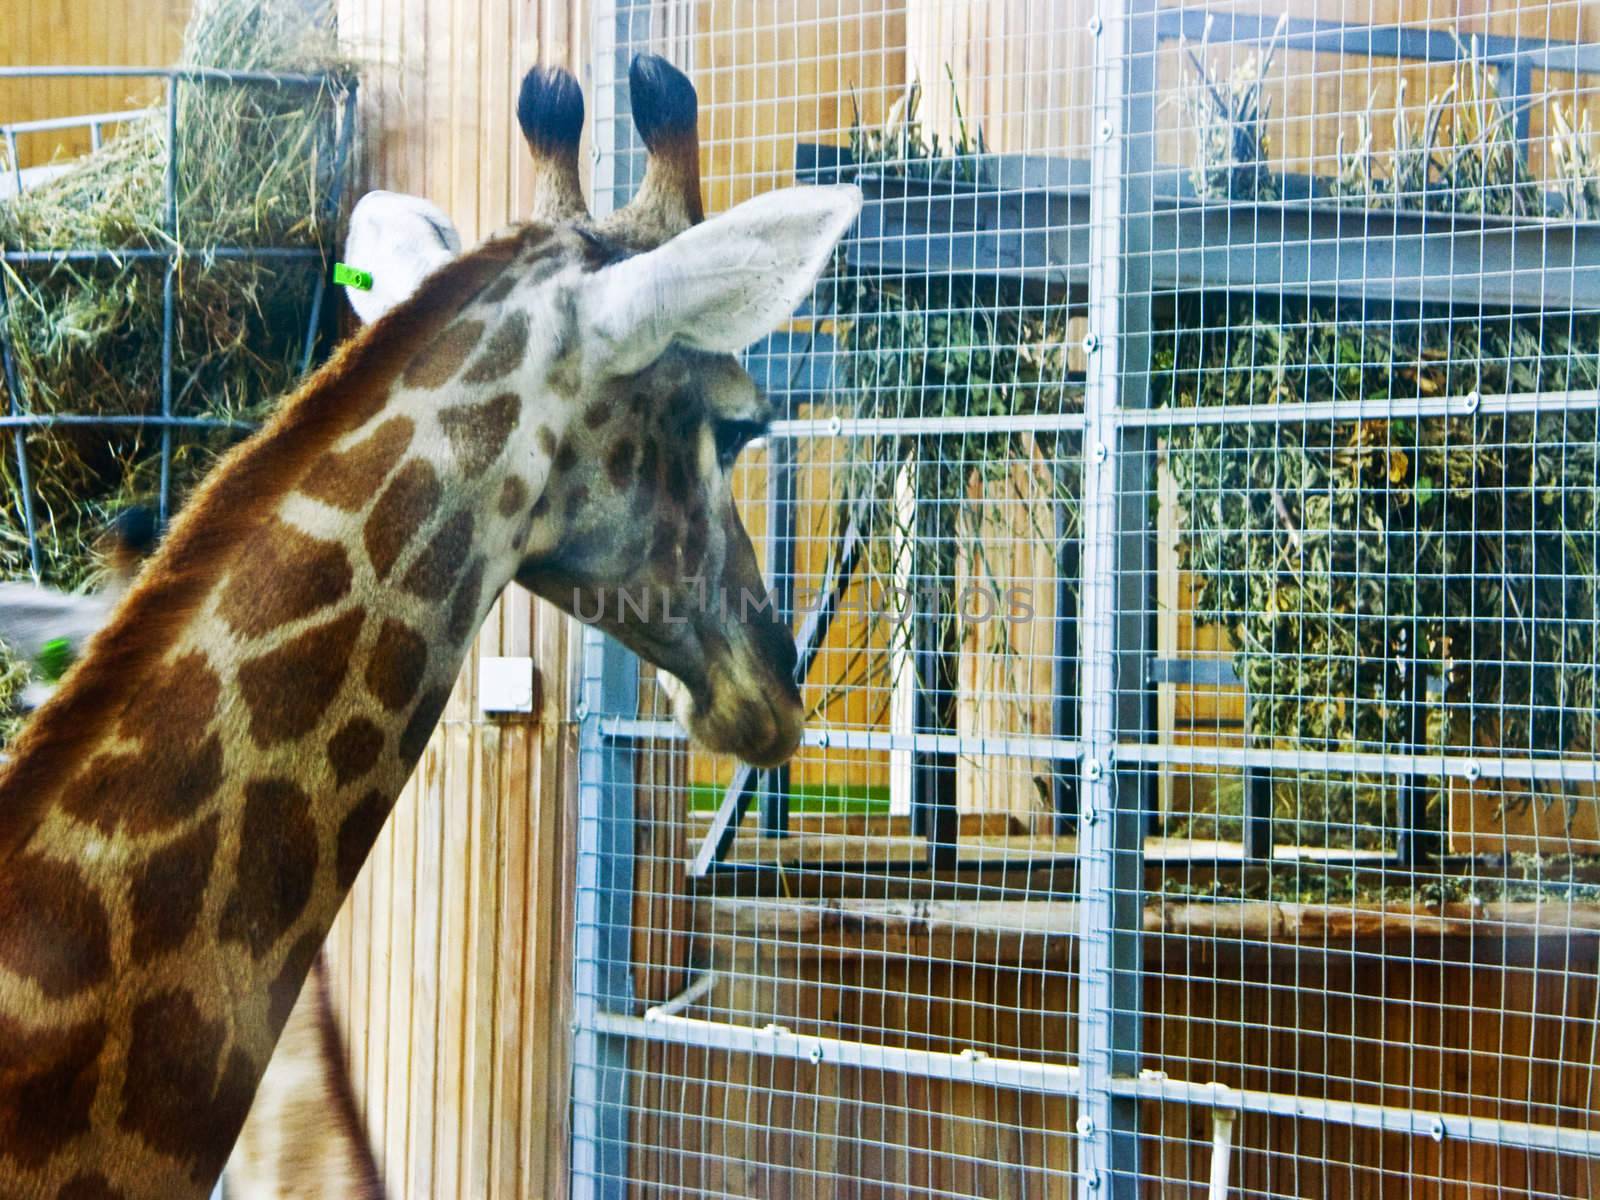 The image of a head of the giraffe photographed through glass of an open-air cage